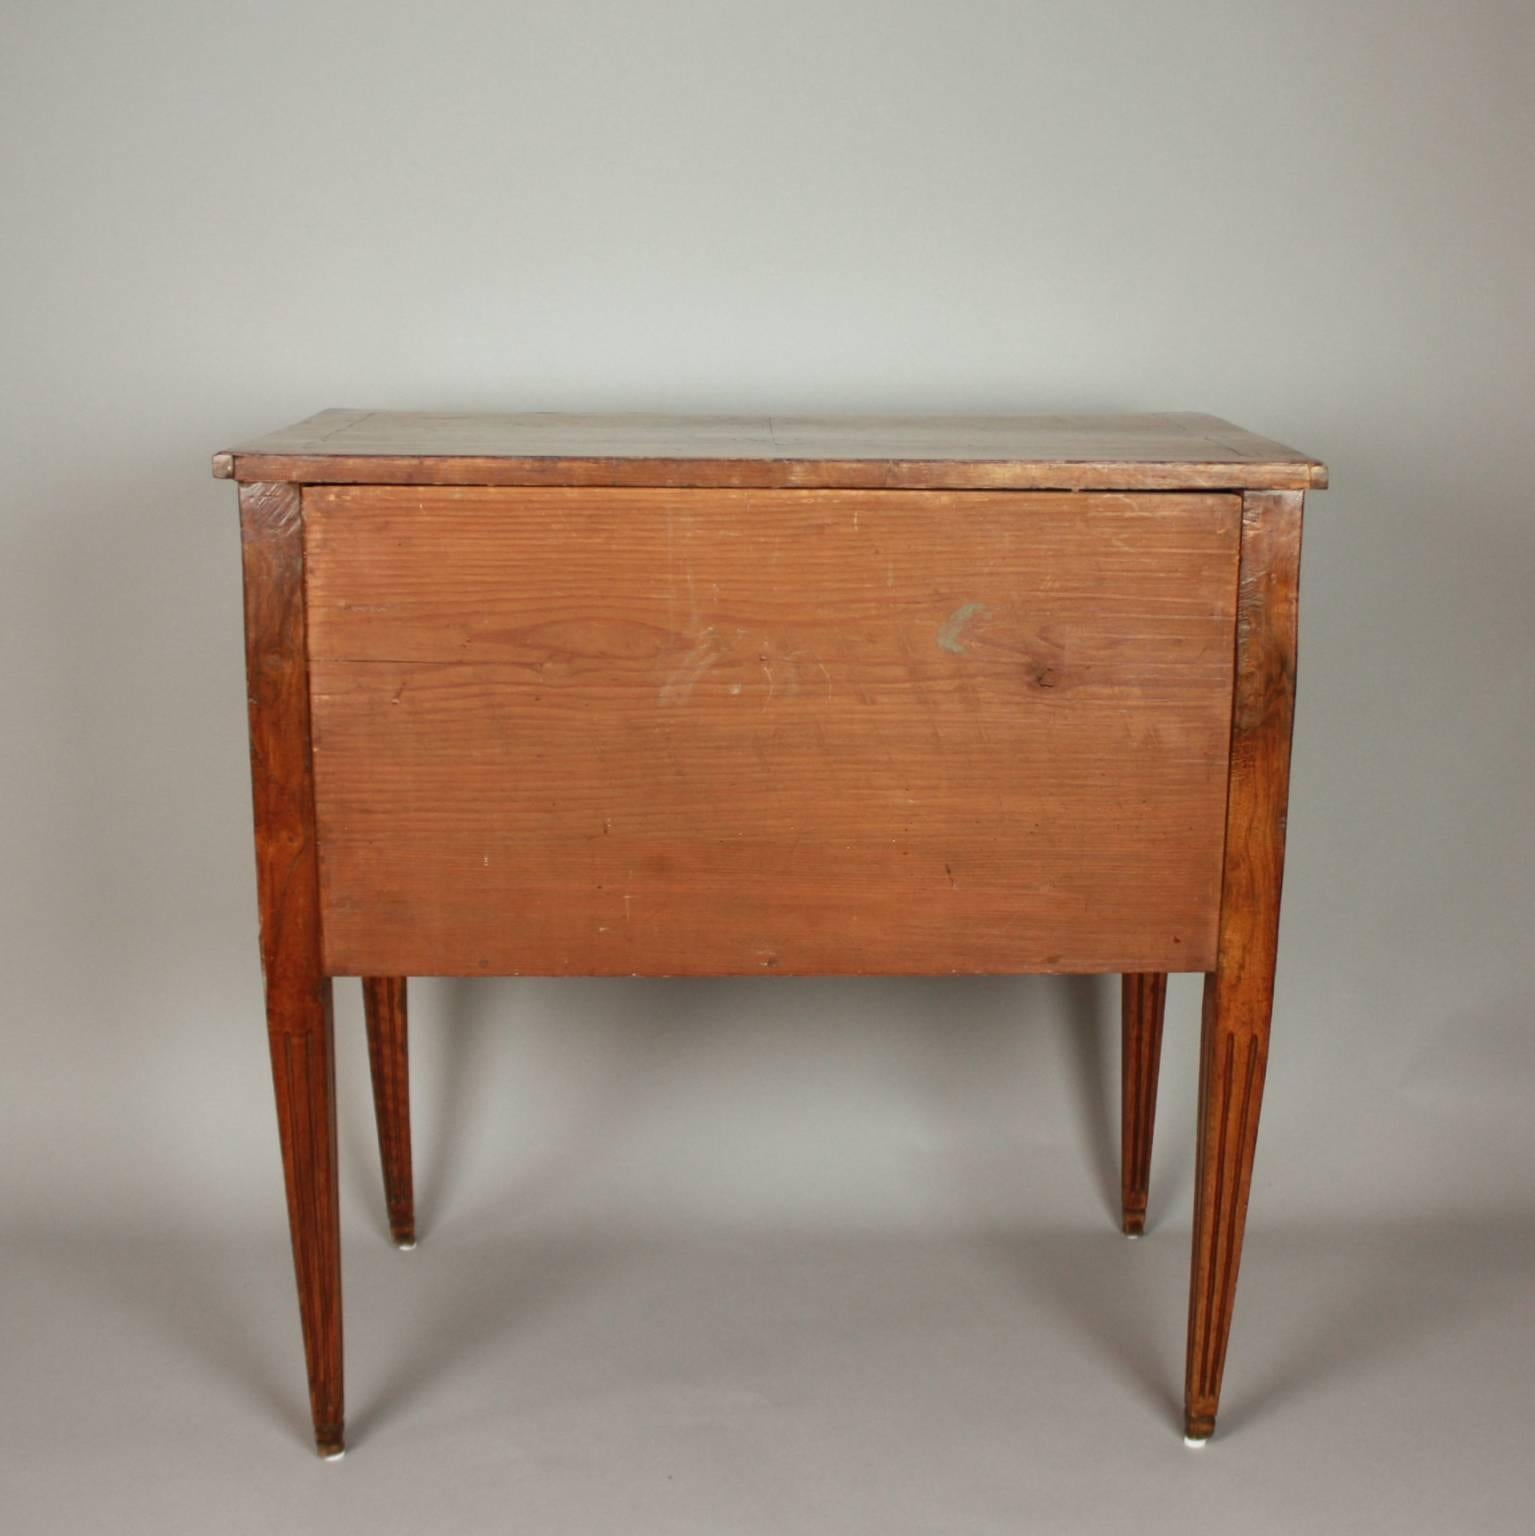 Small German Neoclassical Marquetry Commode or Chest of Drawer, 18th Century (Marketerie)